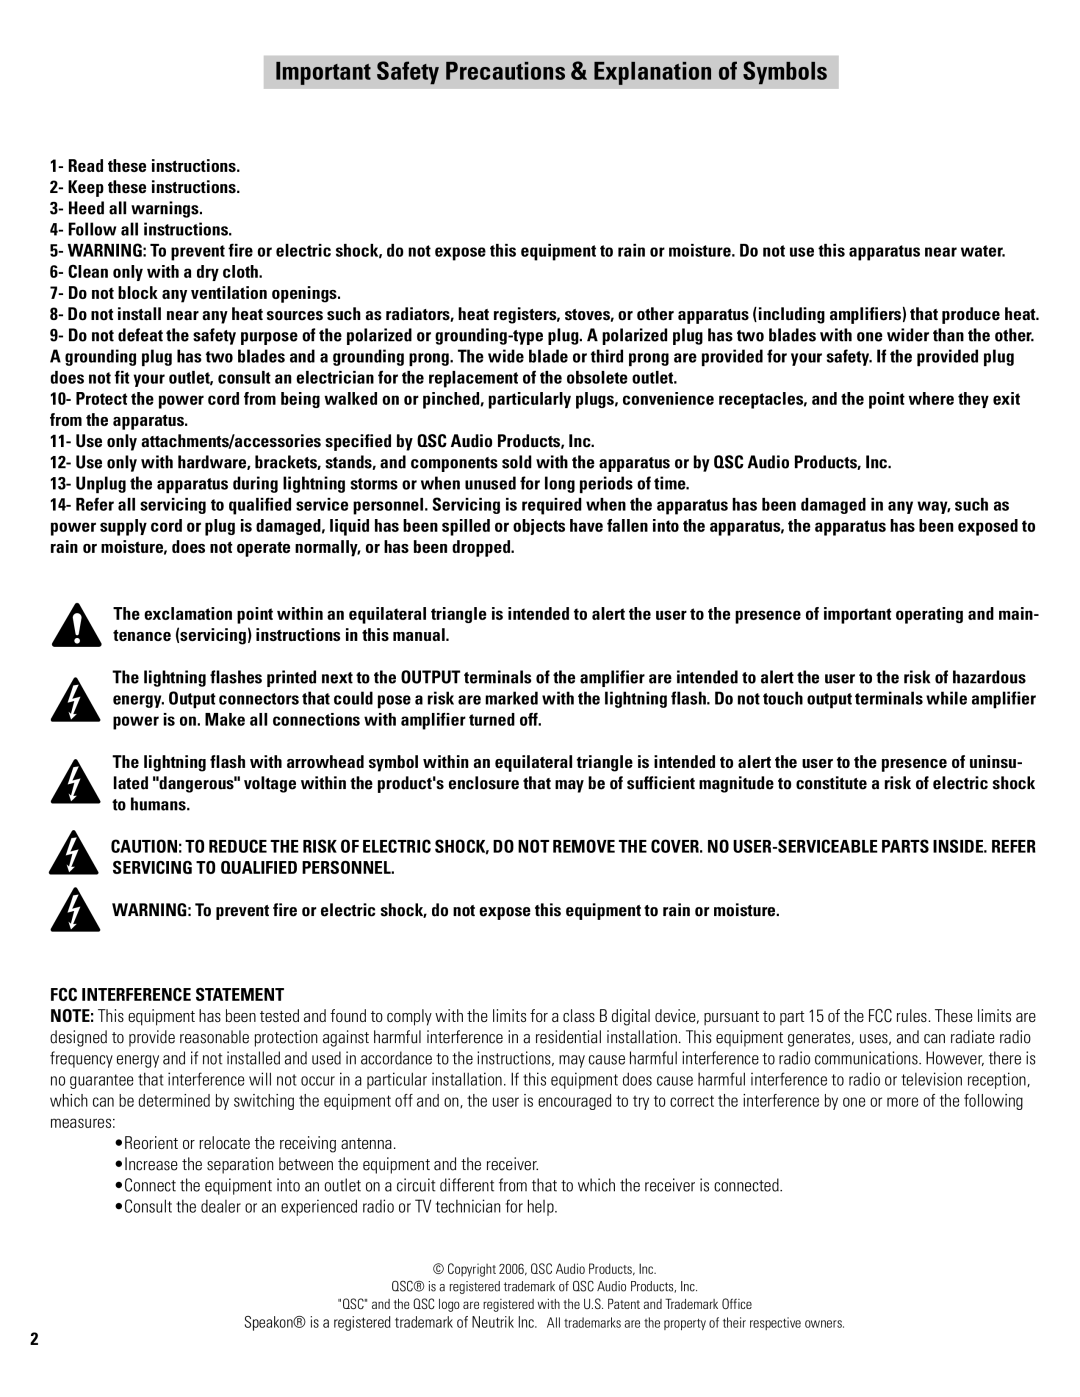 QSC Audio PLX 1104 Read these instructions, Keep these instructions 3- Heed all warnings, Follow all instructions 